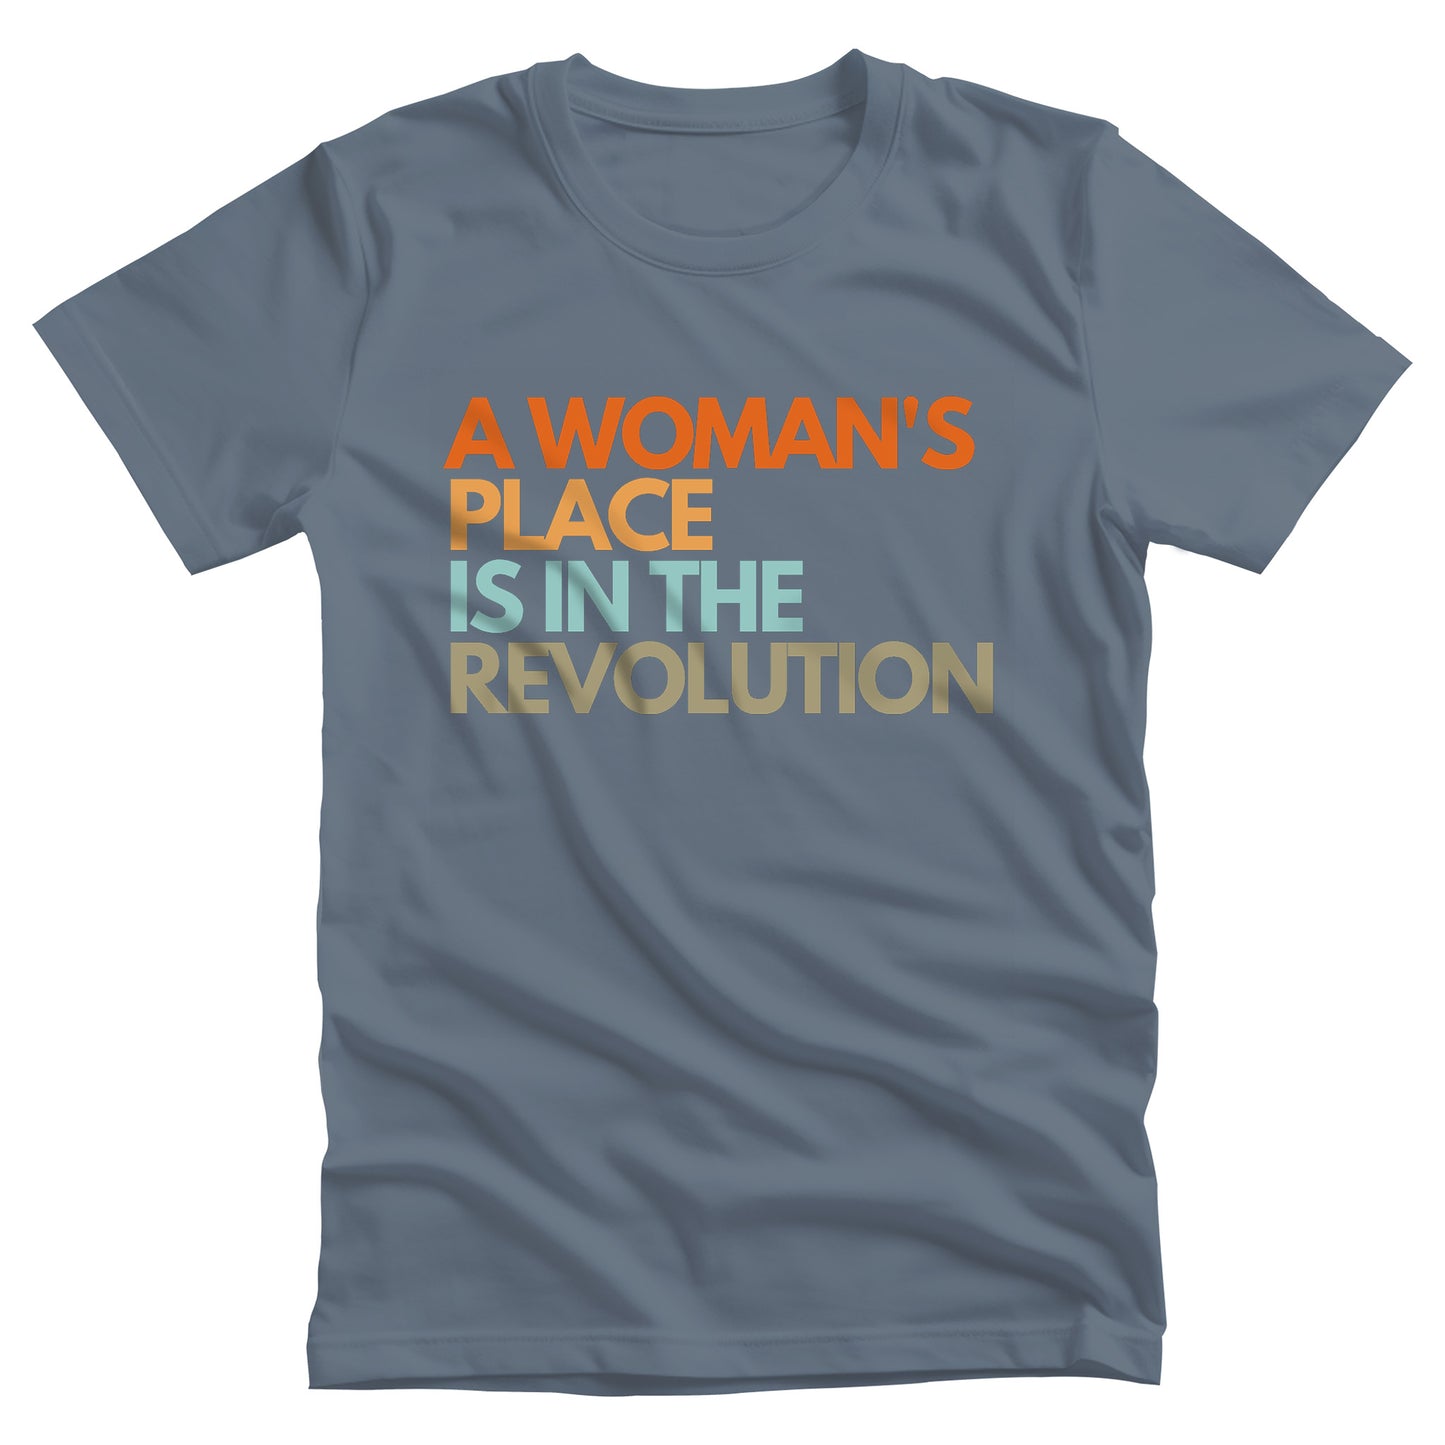 Steel Blue color unisex t-shirt that says “A woman’s place is in the revolution” in a round, modern font in all caps and left aligned. Each line is a different color. “A Woman’s” is orange, “place” is yellow-orange, “is in the” is light blue, and “revolution” is military green.